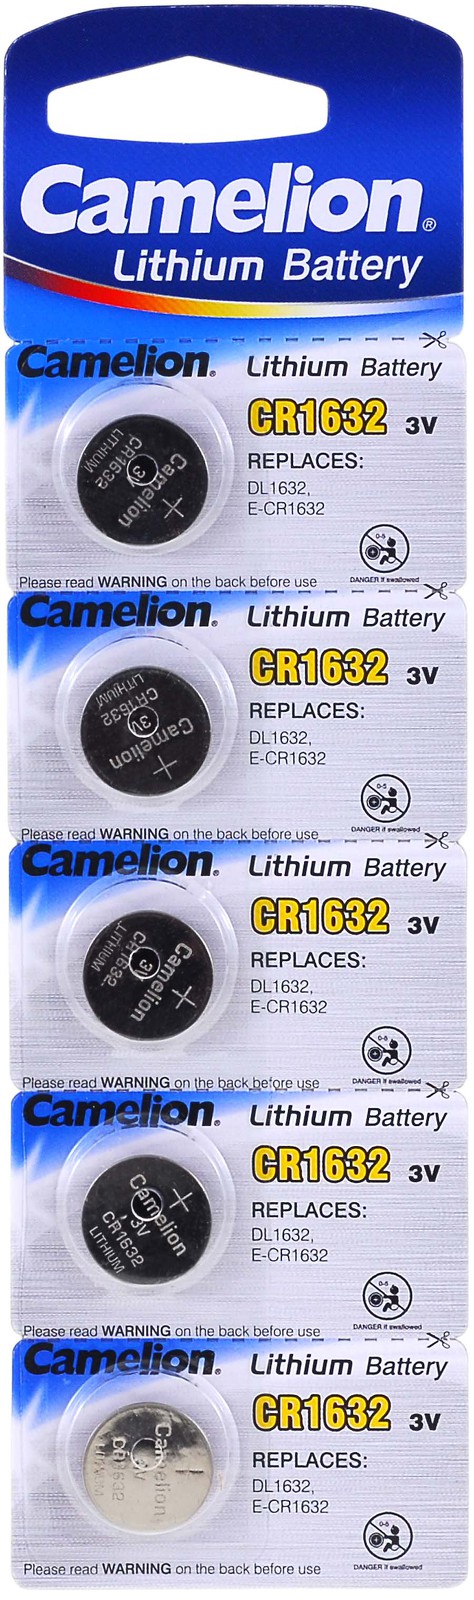 CR1632 5er-Pack Camelion 13005632 Lithium Knopfzelle 